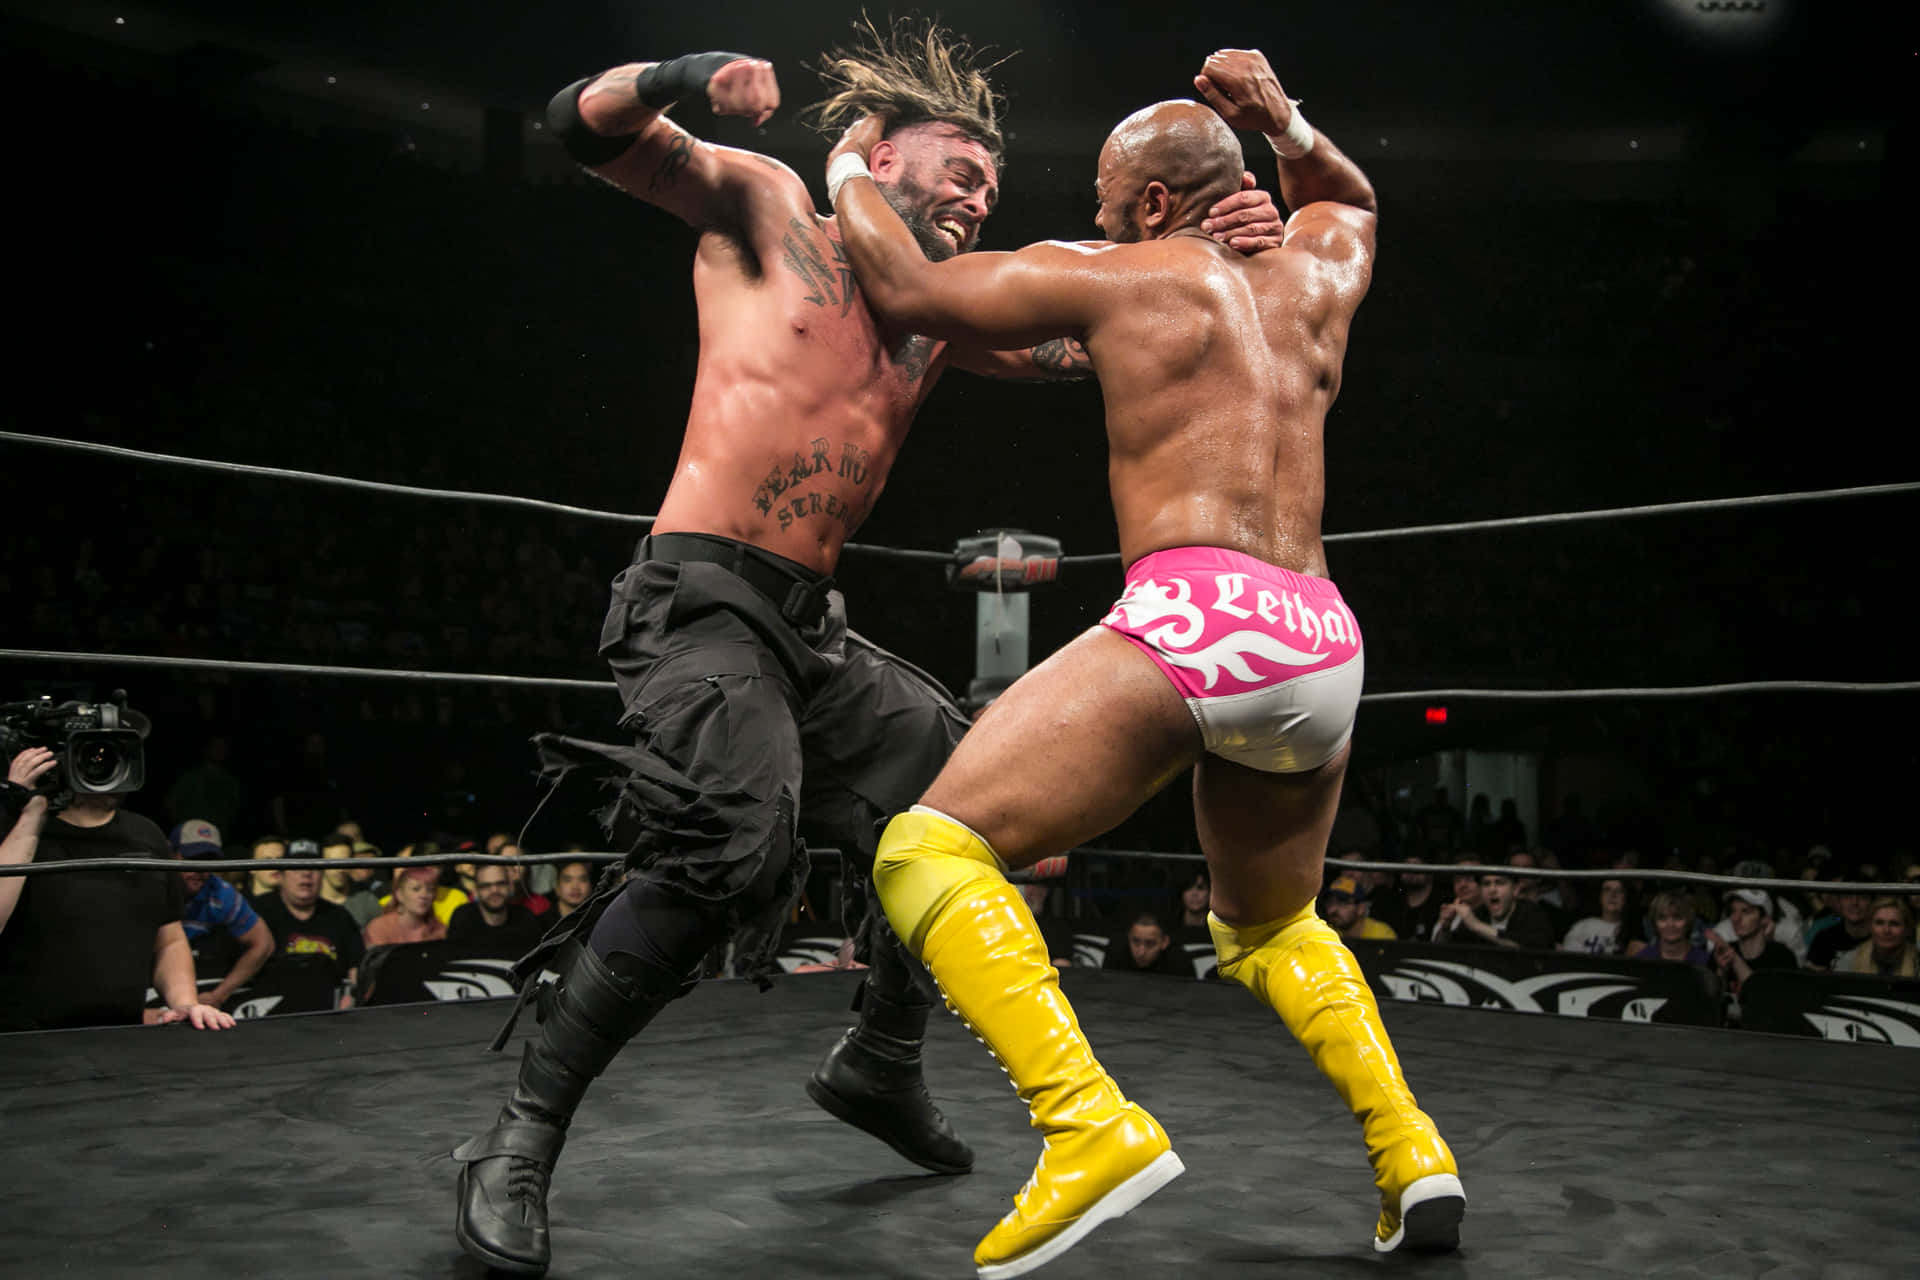 Aew Wrestler Jay Lethal Fight Background